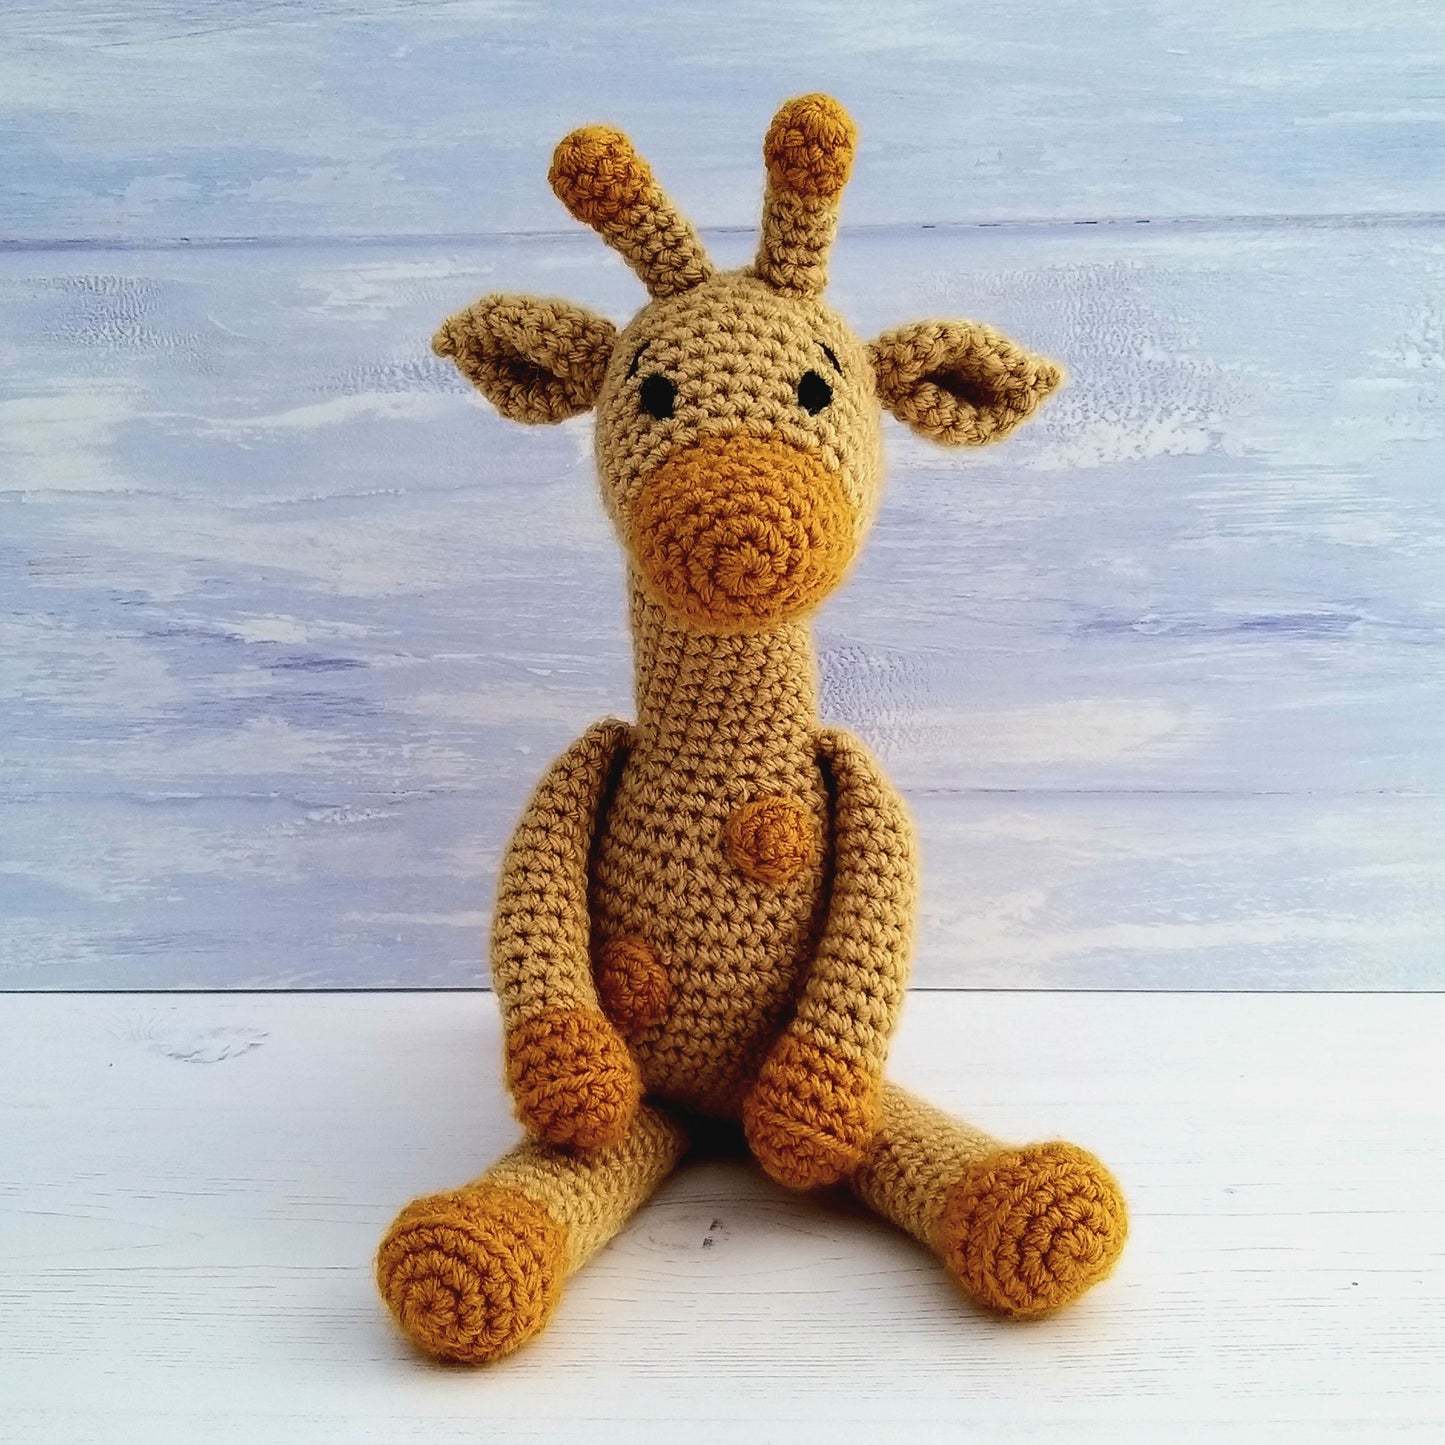 Bundle of Three Crochet Kits - Betsy Bunny, Aimee the Giraffe and Alfred the Lion